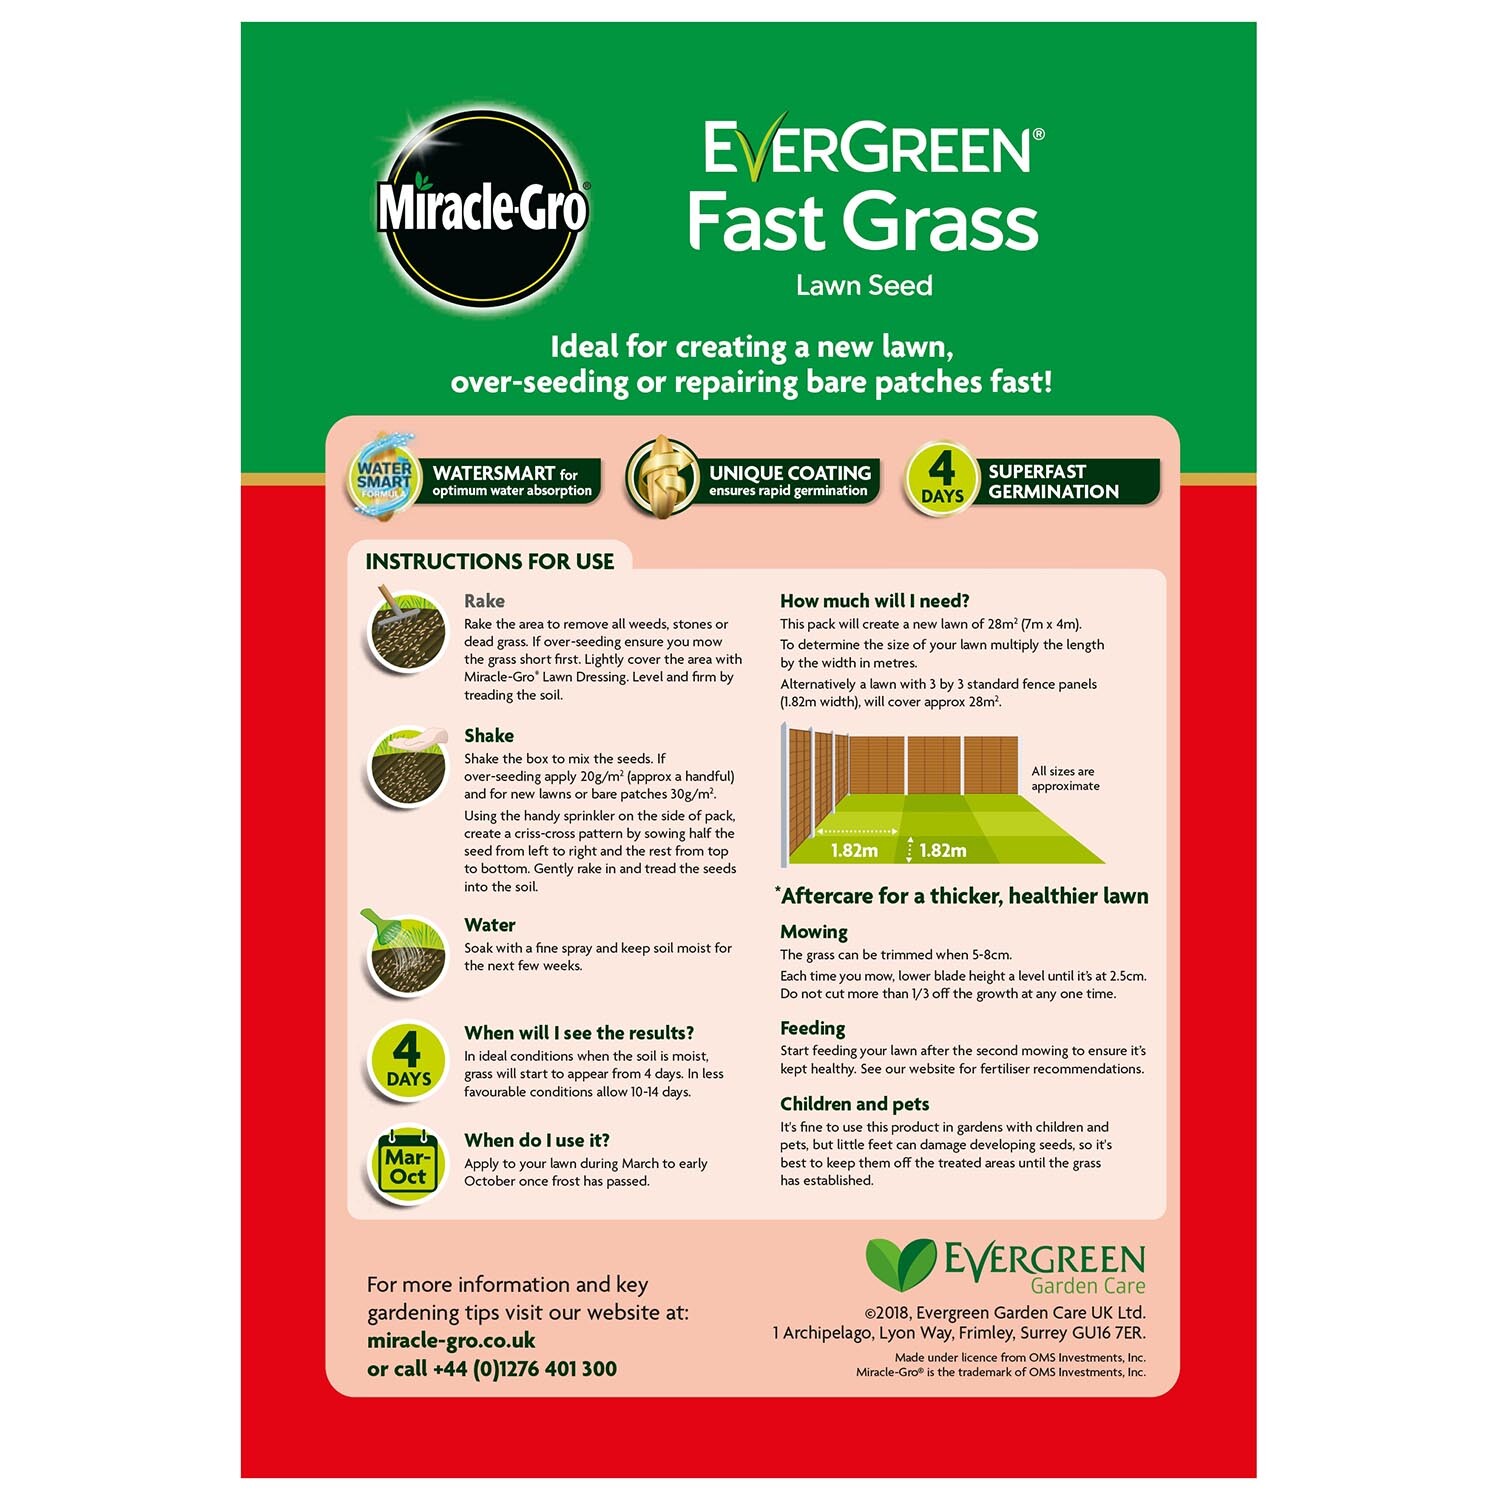 Miracle-Gro Evergreen Fast Grass Lawn Seed Image 2